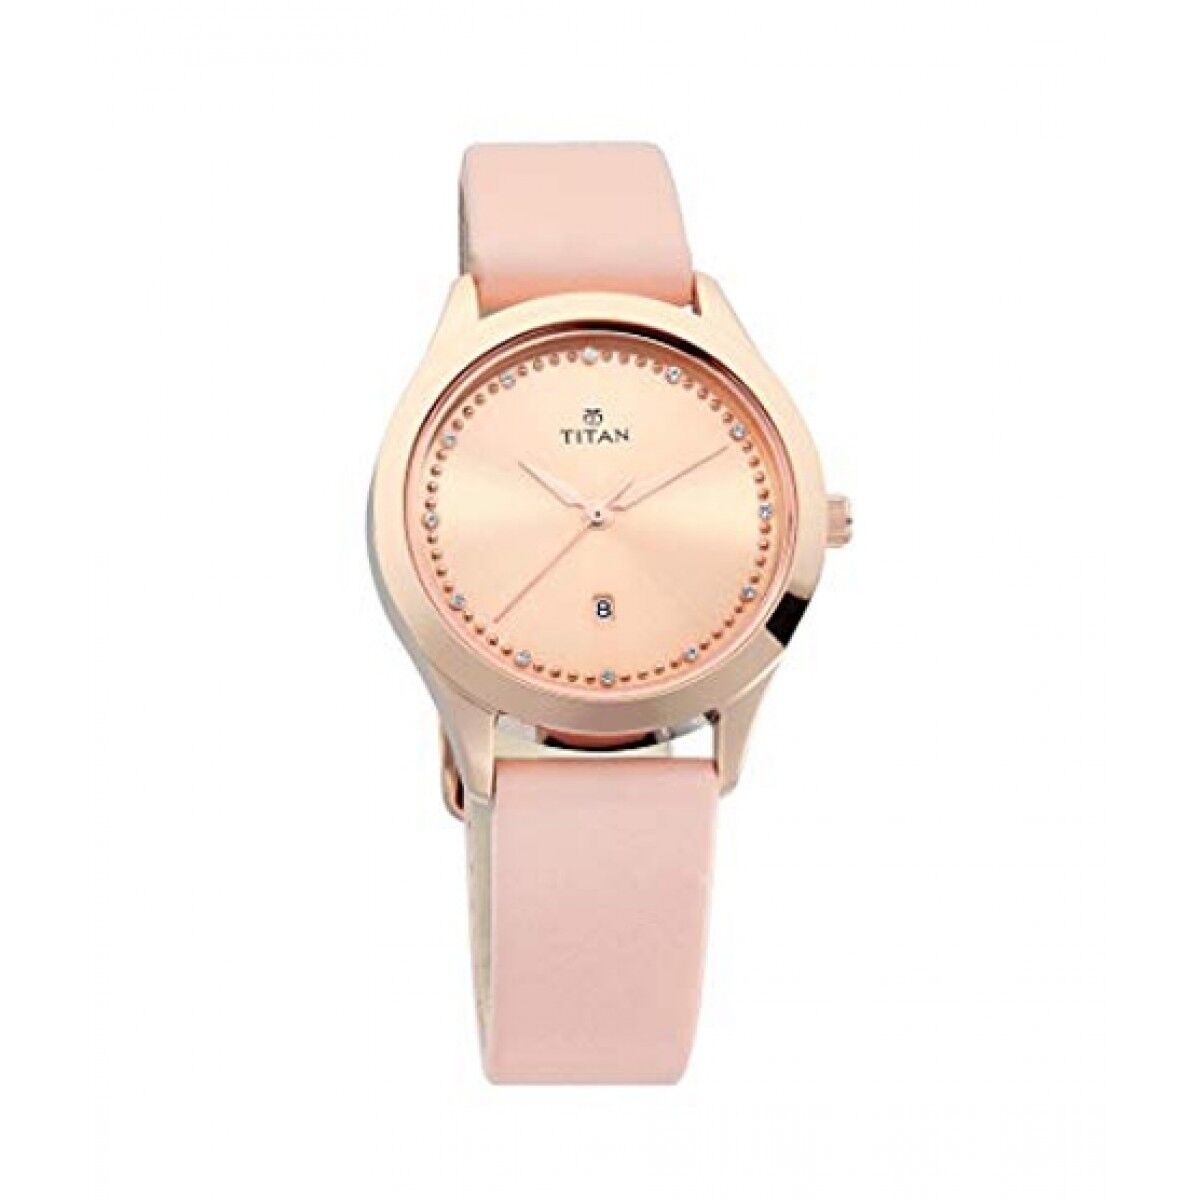 Titan Sparkle Dial Analog Women's Watch 2570WL01 | Leather Band | Water-Resistant | Quartz Movement | Classic Style | Fashionable | Durable | Affordable | Halabh.com